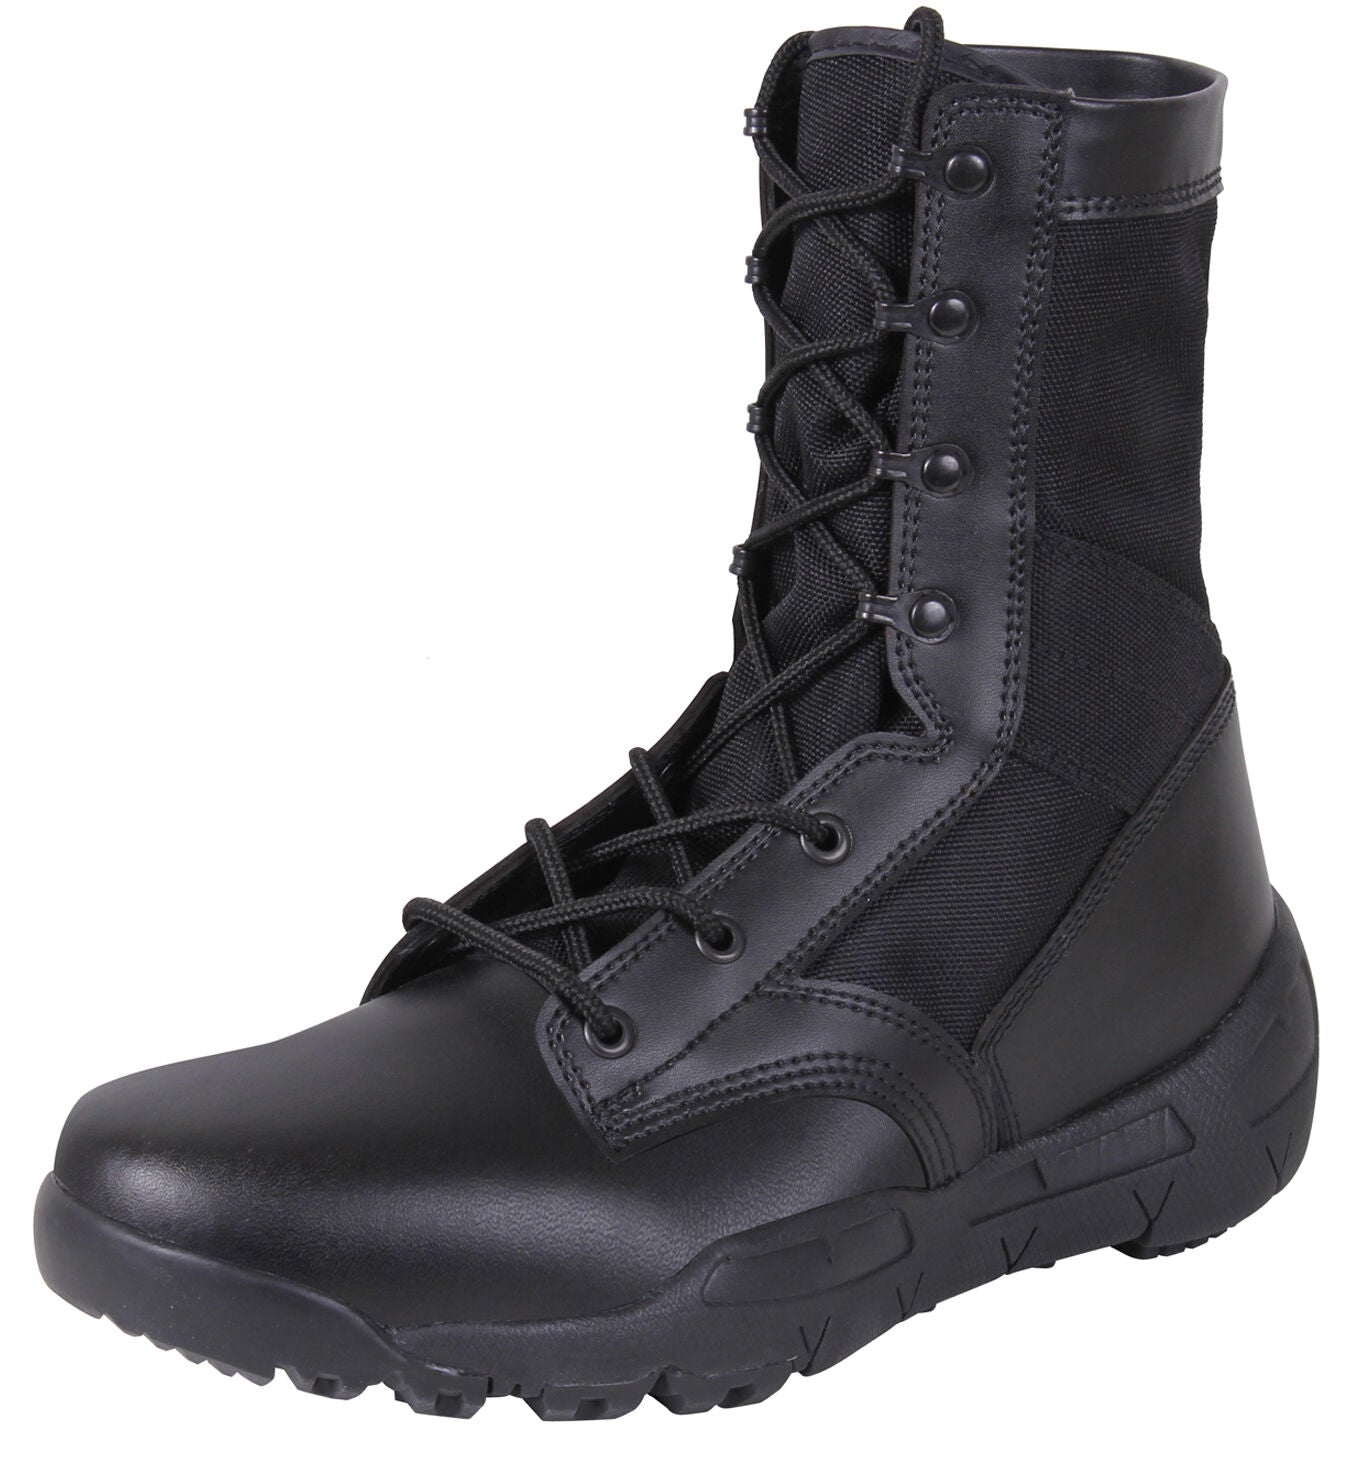 Rothco V-Max Lightweight Tactical Boot - Black